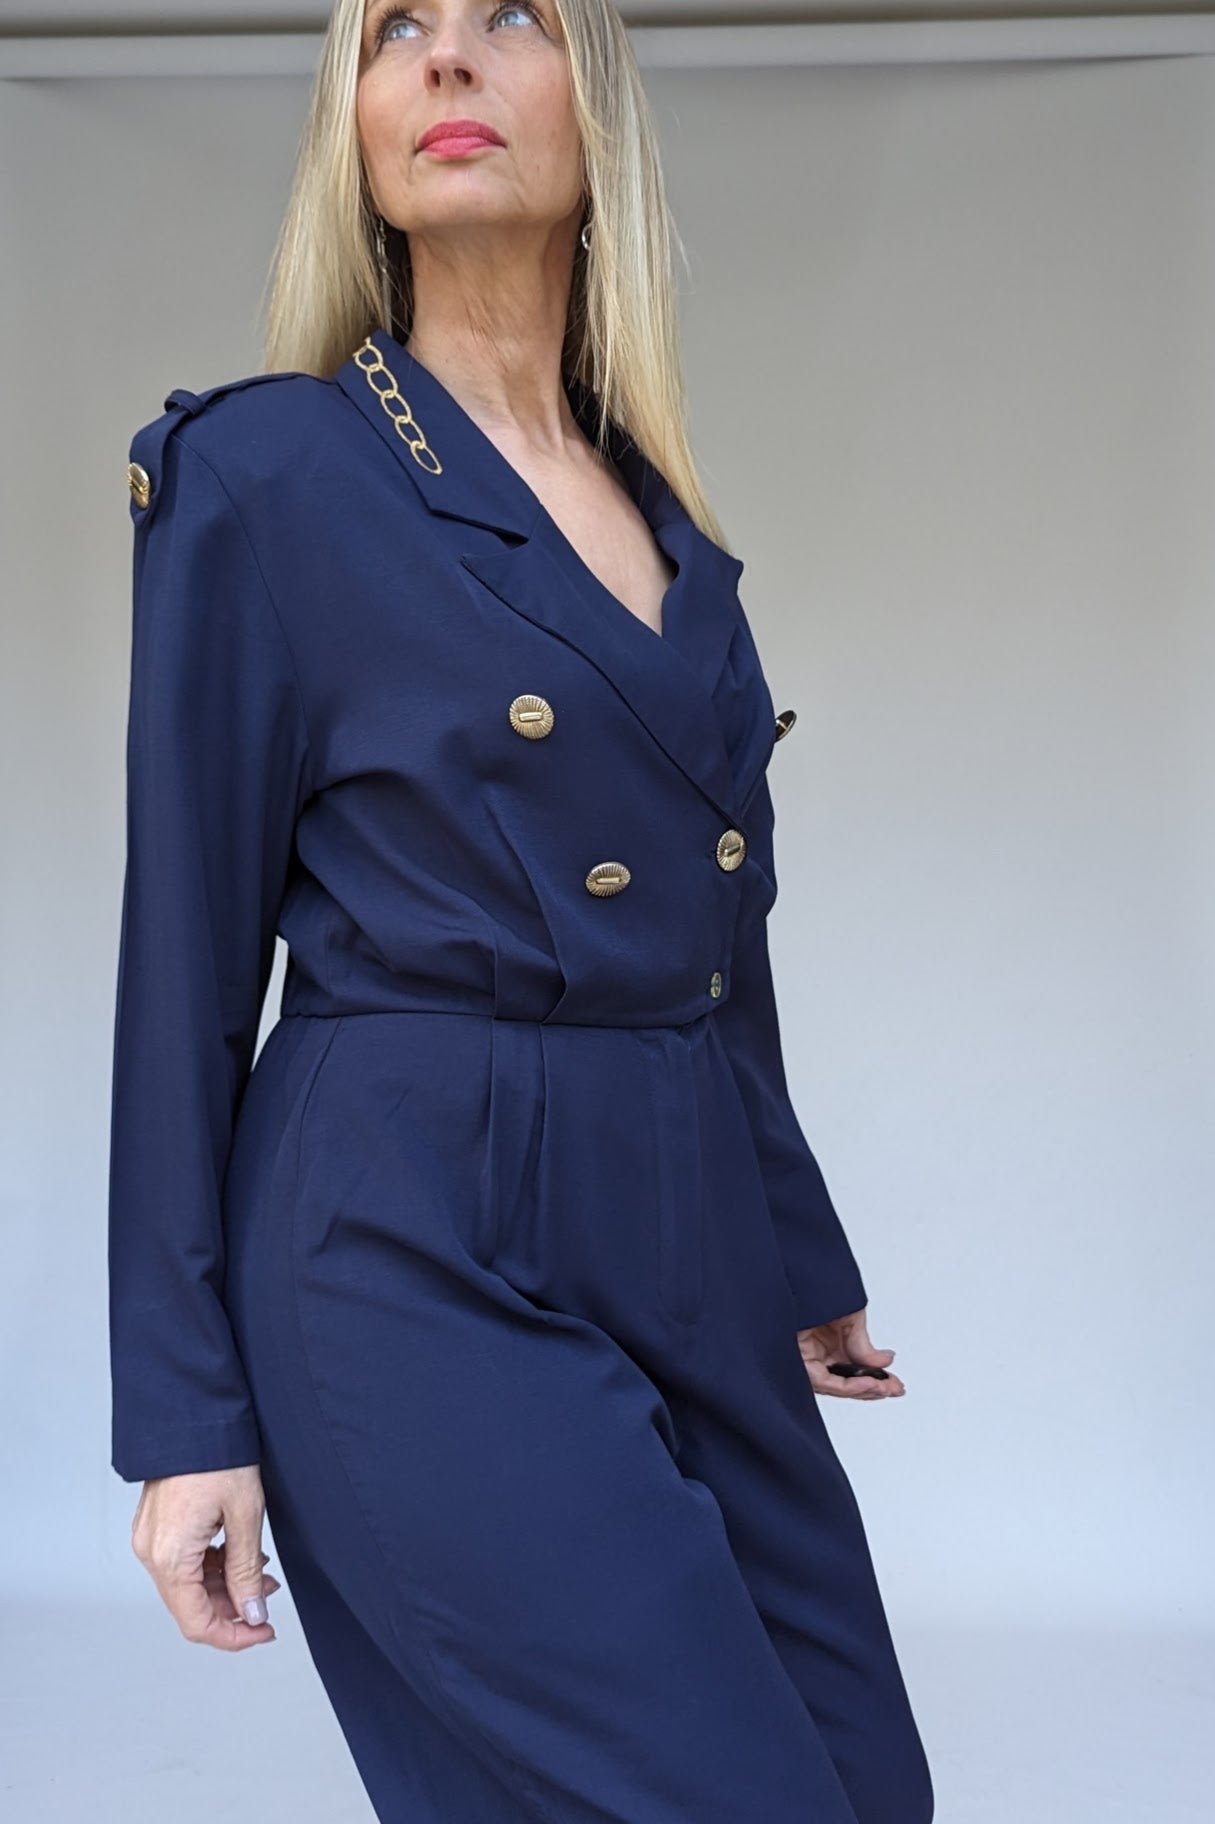 Navy jumpsuit with gold button epaulettes